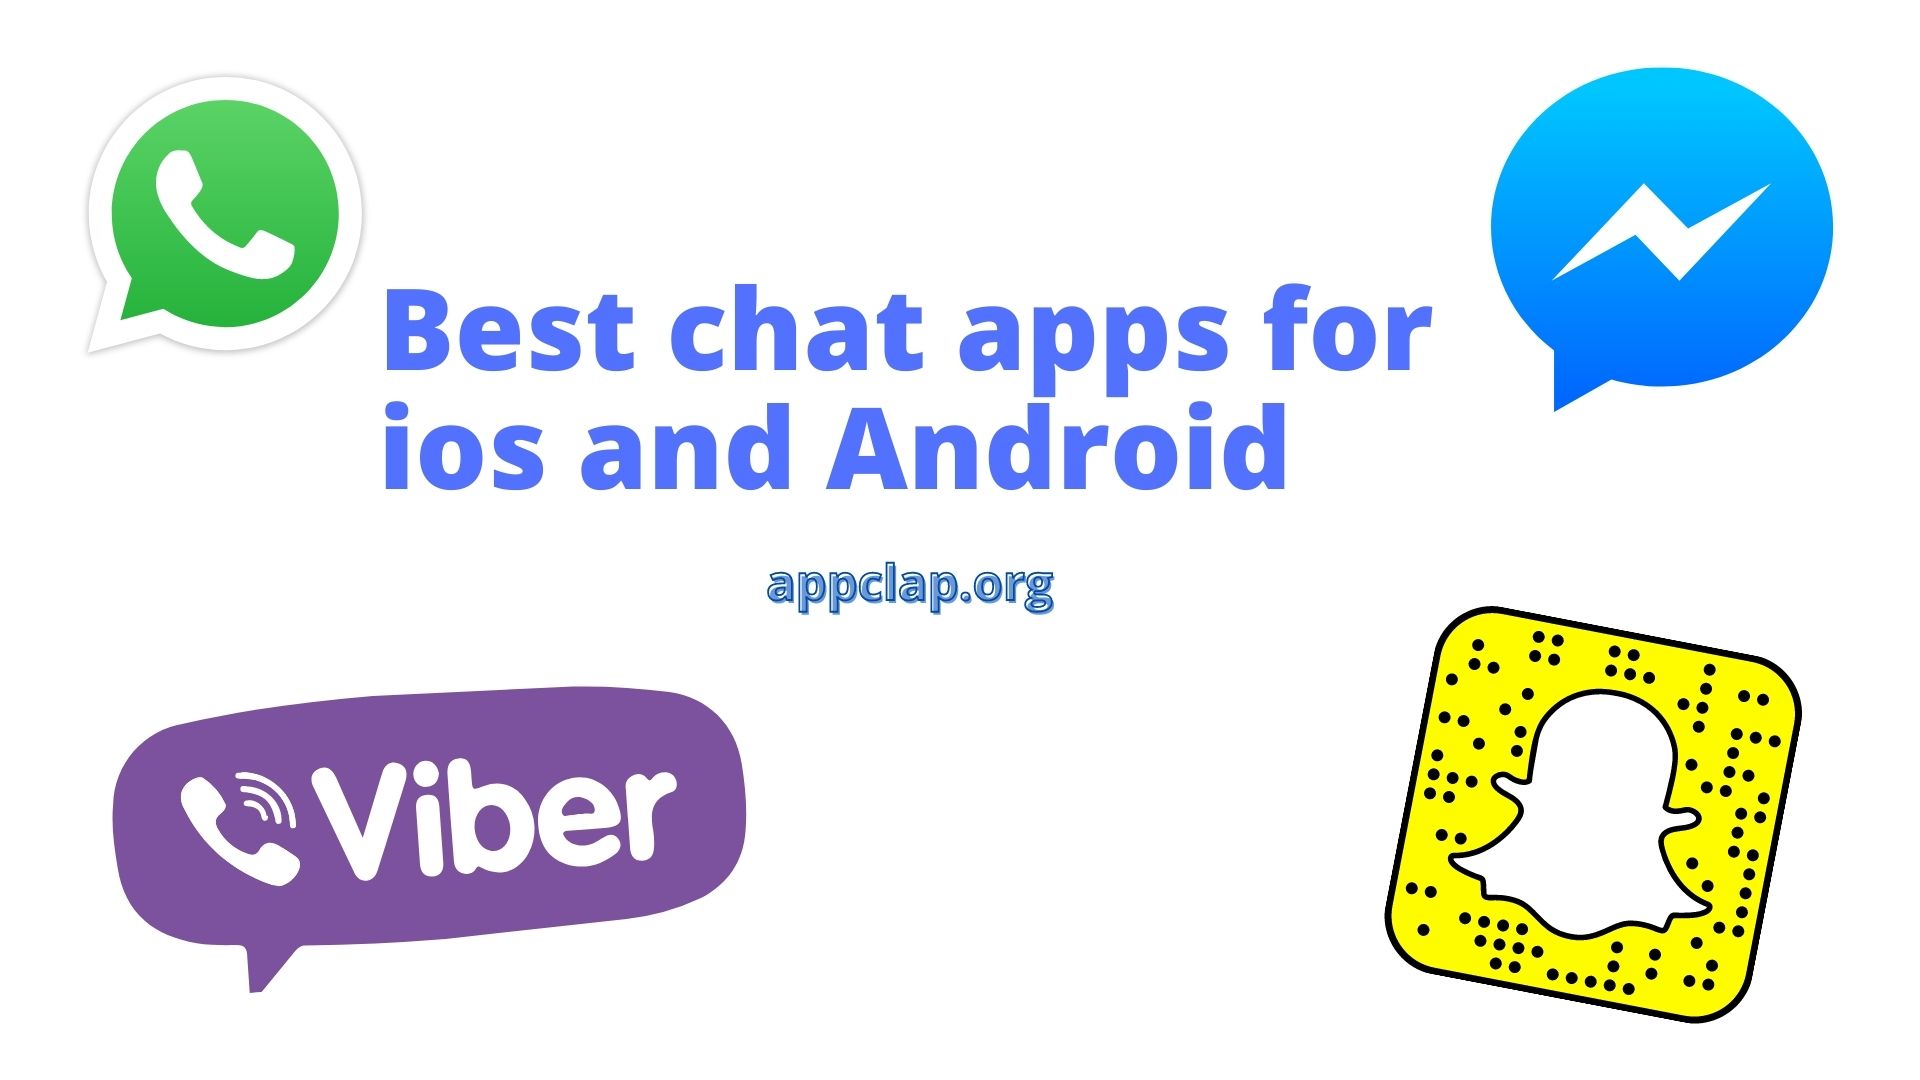 Best chat apps for ios and Android